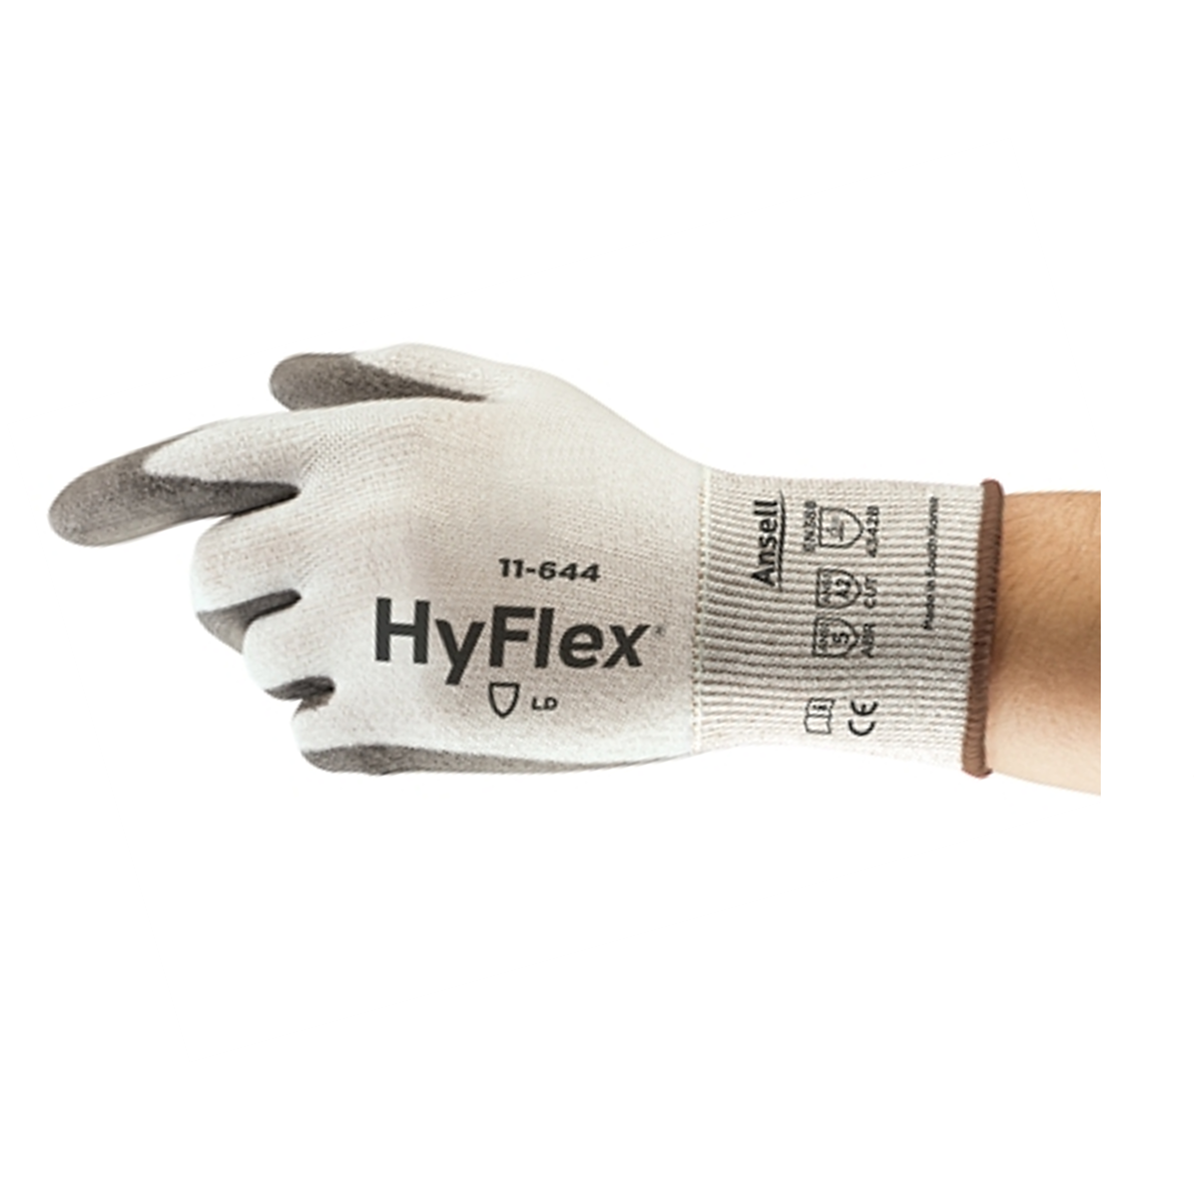 Airgas - ANE80-100-7 - Ansell Size 7 ActivArmr® Natural Latex Rubber Coated  Work Gloves With Cotton And Polyester Liner And Knit Wrist